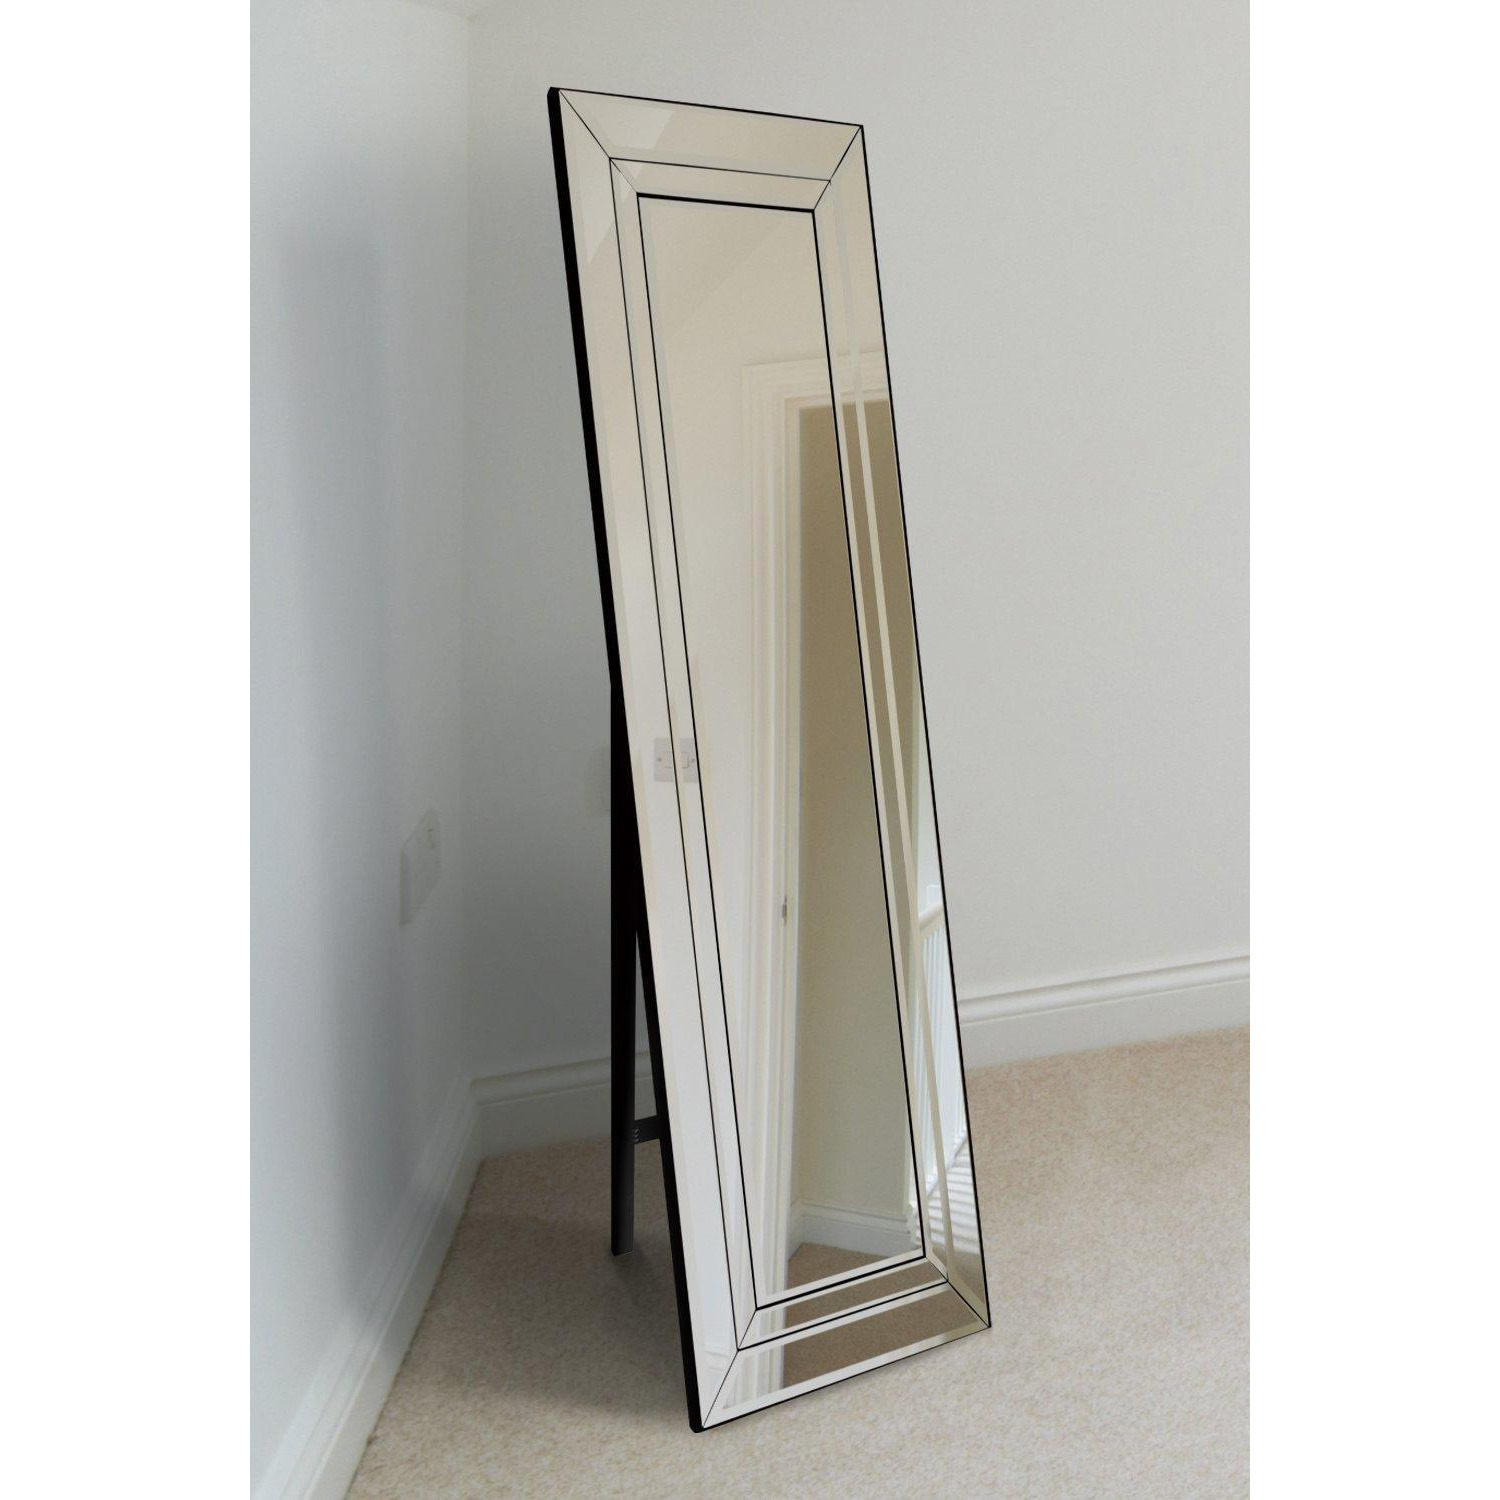 Double Bevelled Large Modern Venetian Cheval Free Standing Mirror 5Ft X 1Ft3 (150 X 40cm) - image 1